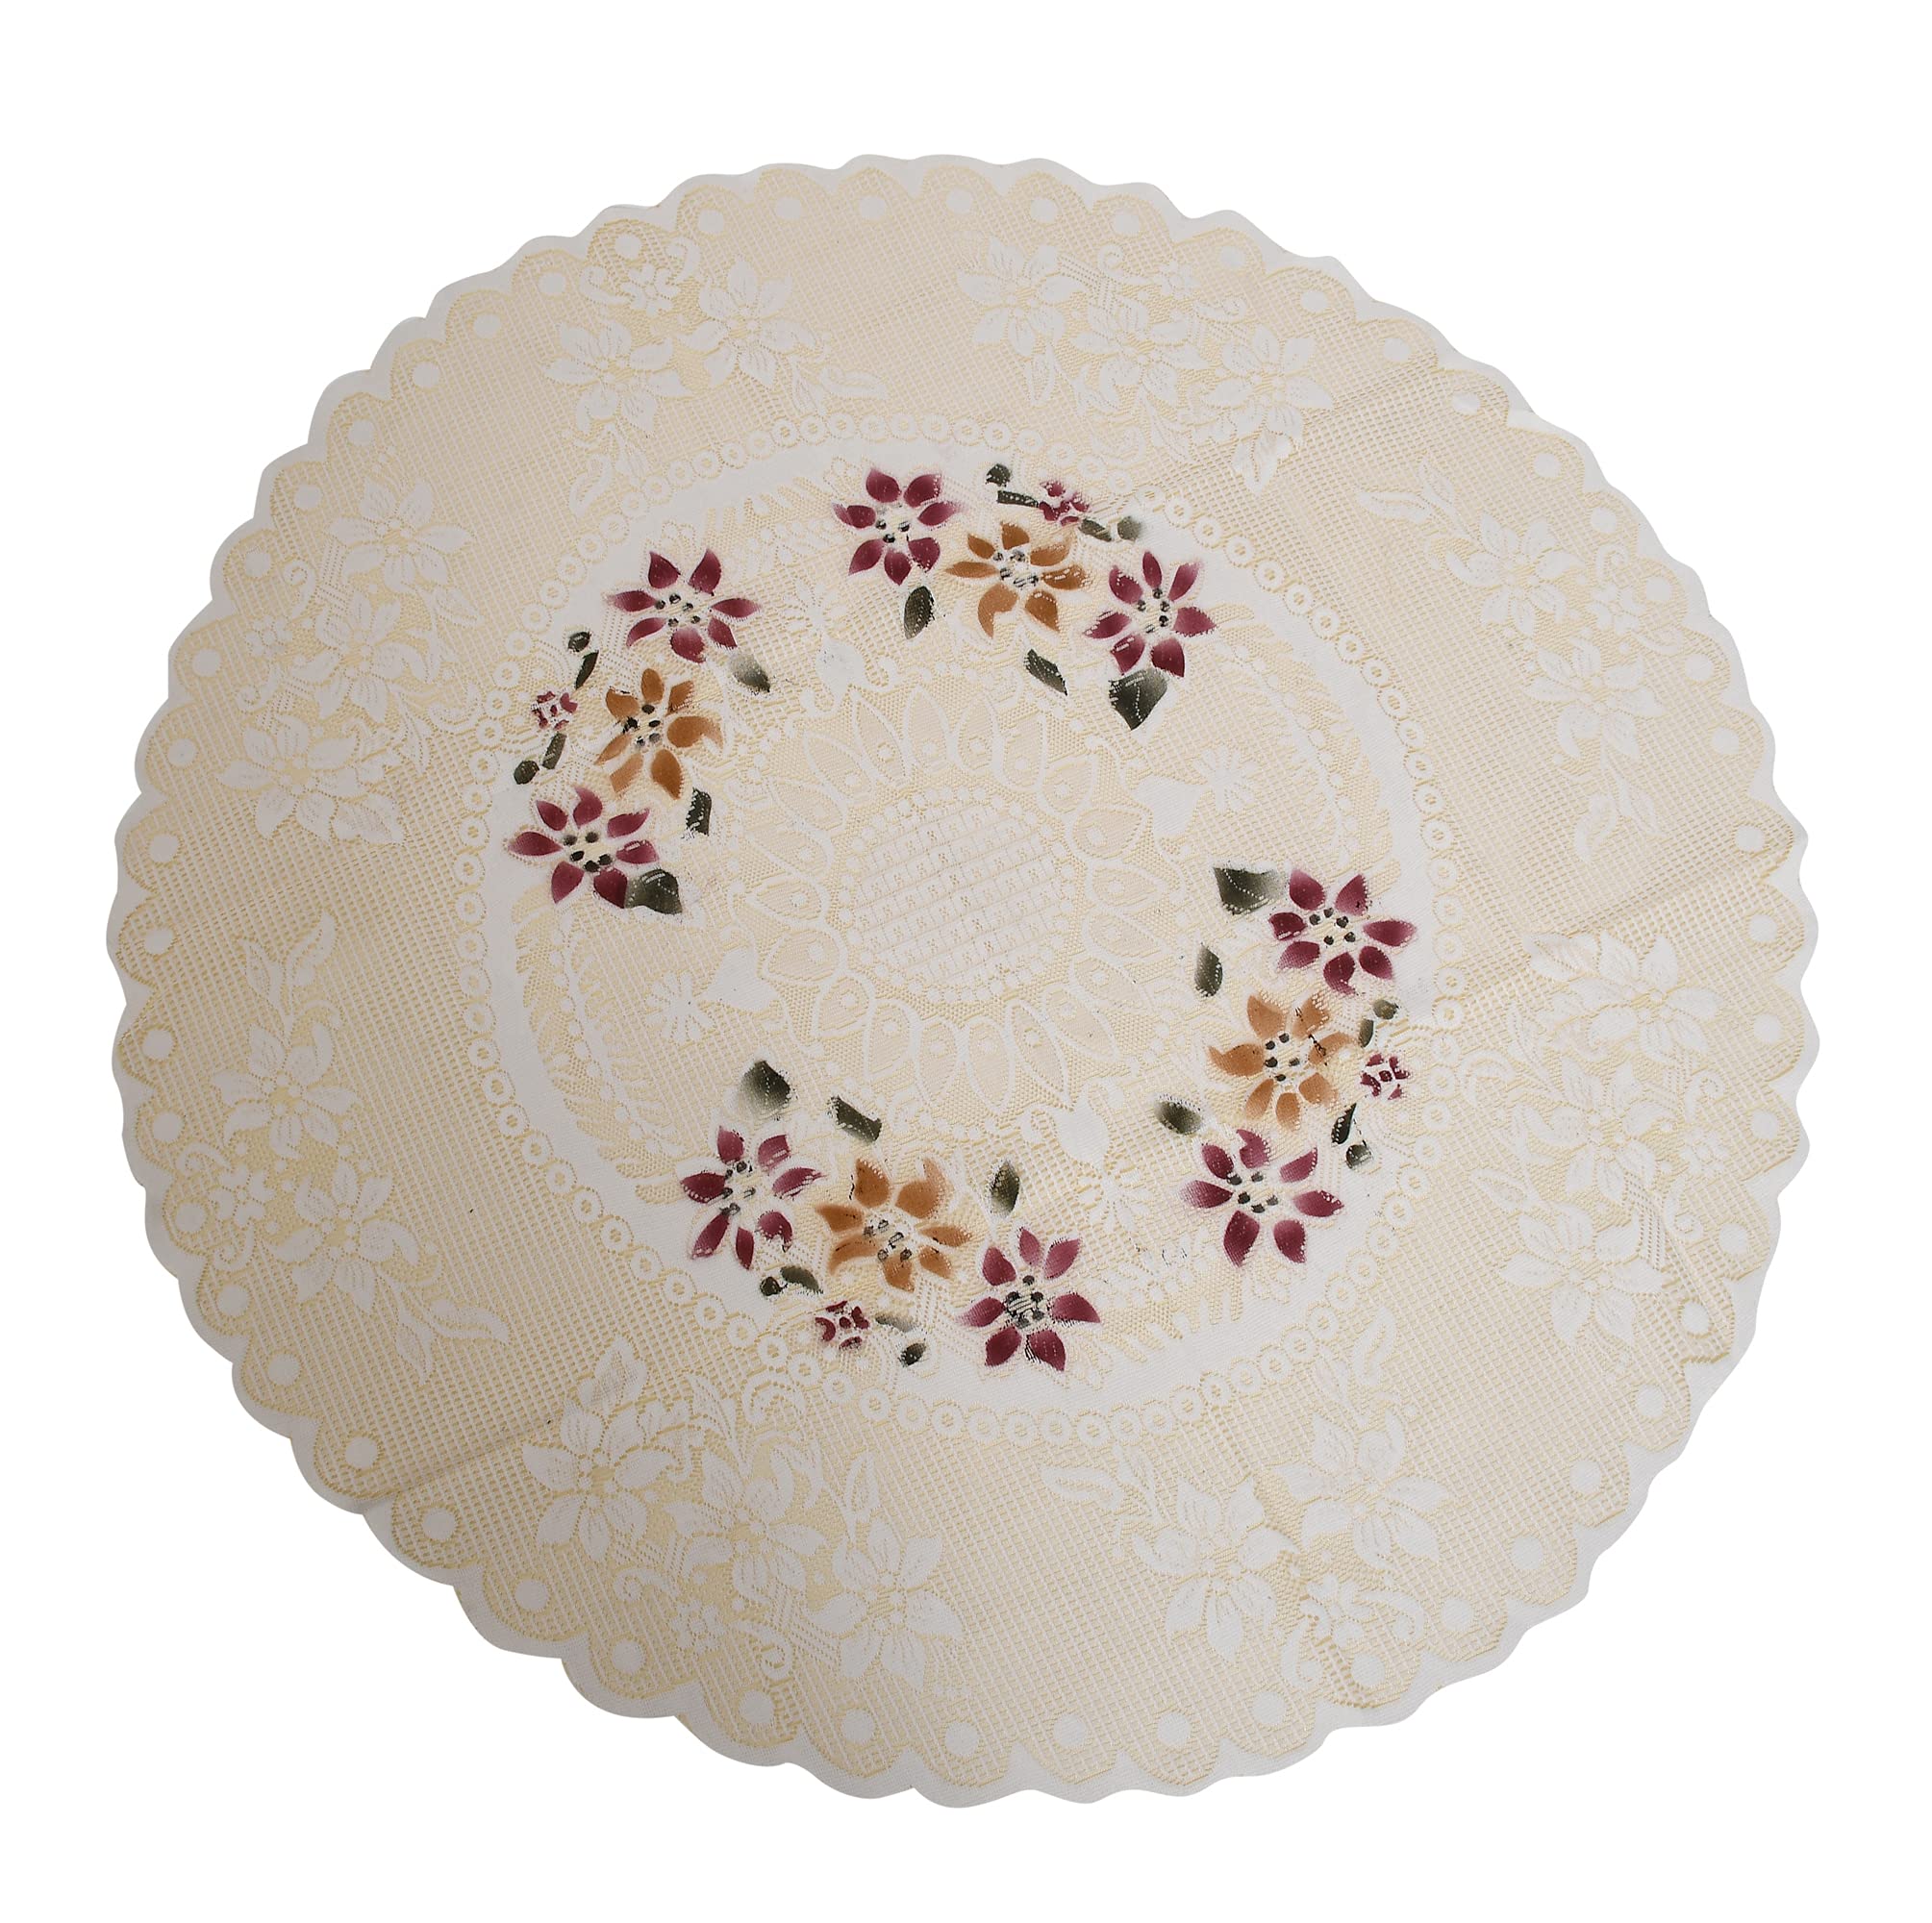 Heart Home Cotton Round Table Cover with Flower Design for Parties, Birthdays or Special Holiday Gatherings & Indoor/Outdoor (Brown), Standard (HS_37_HEARTH020507)